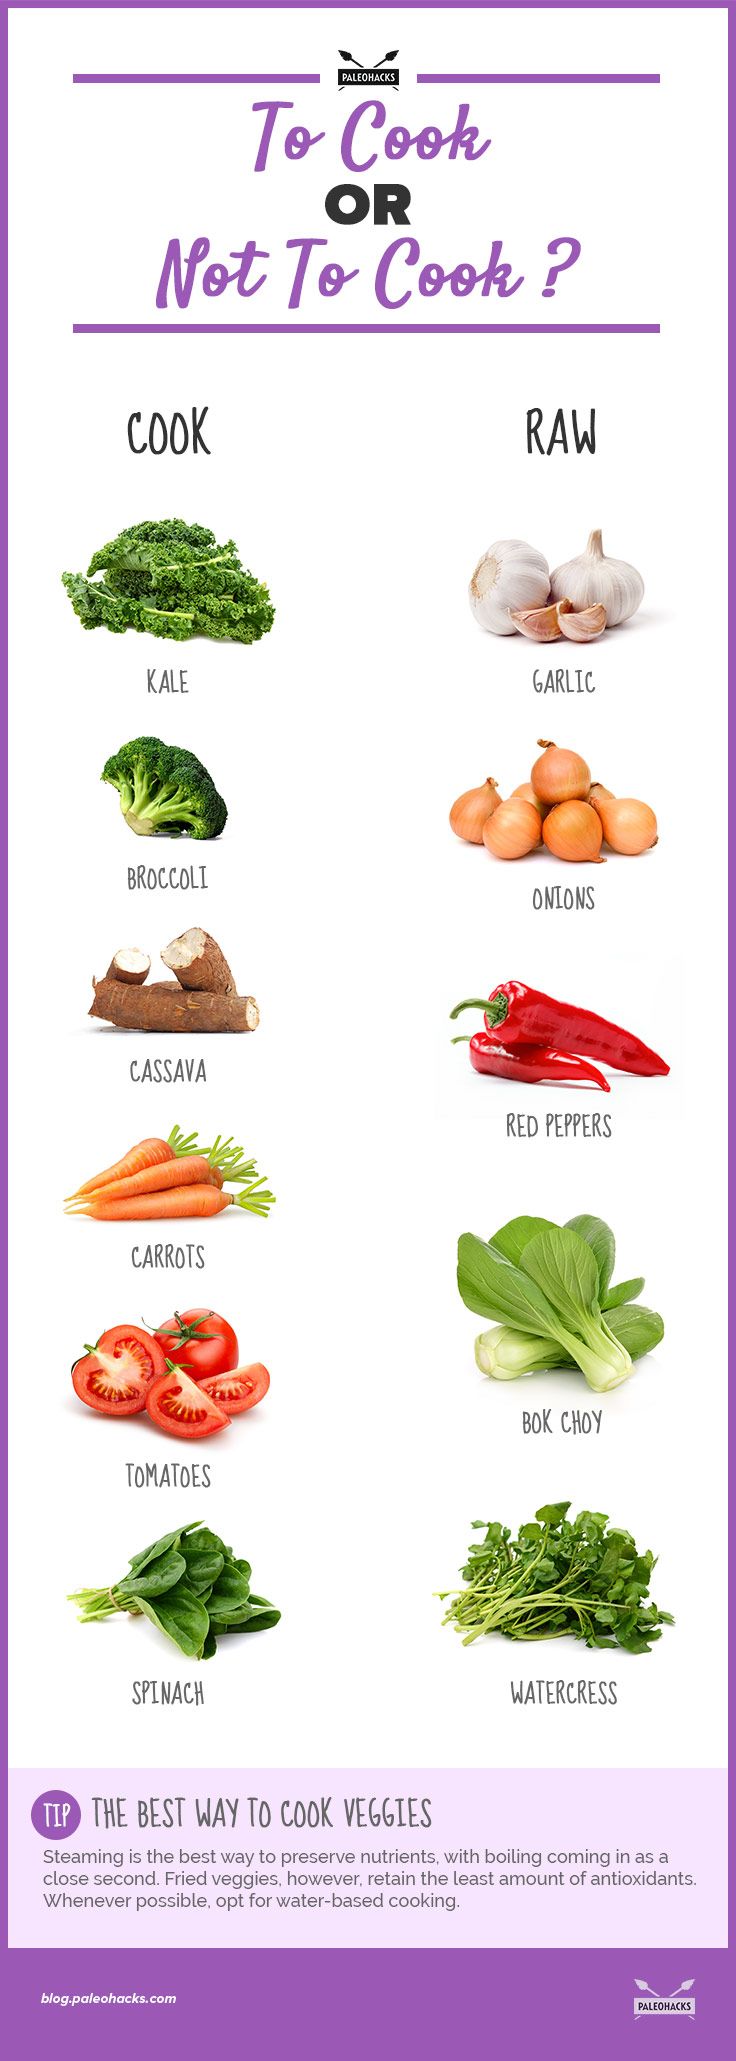 raw vs cooked vegetables infographic